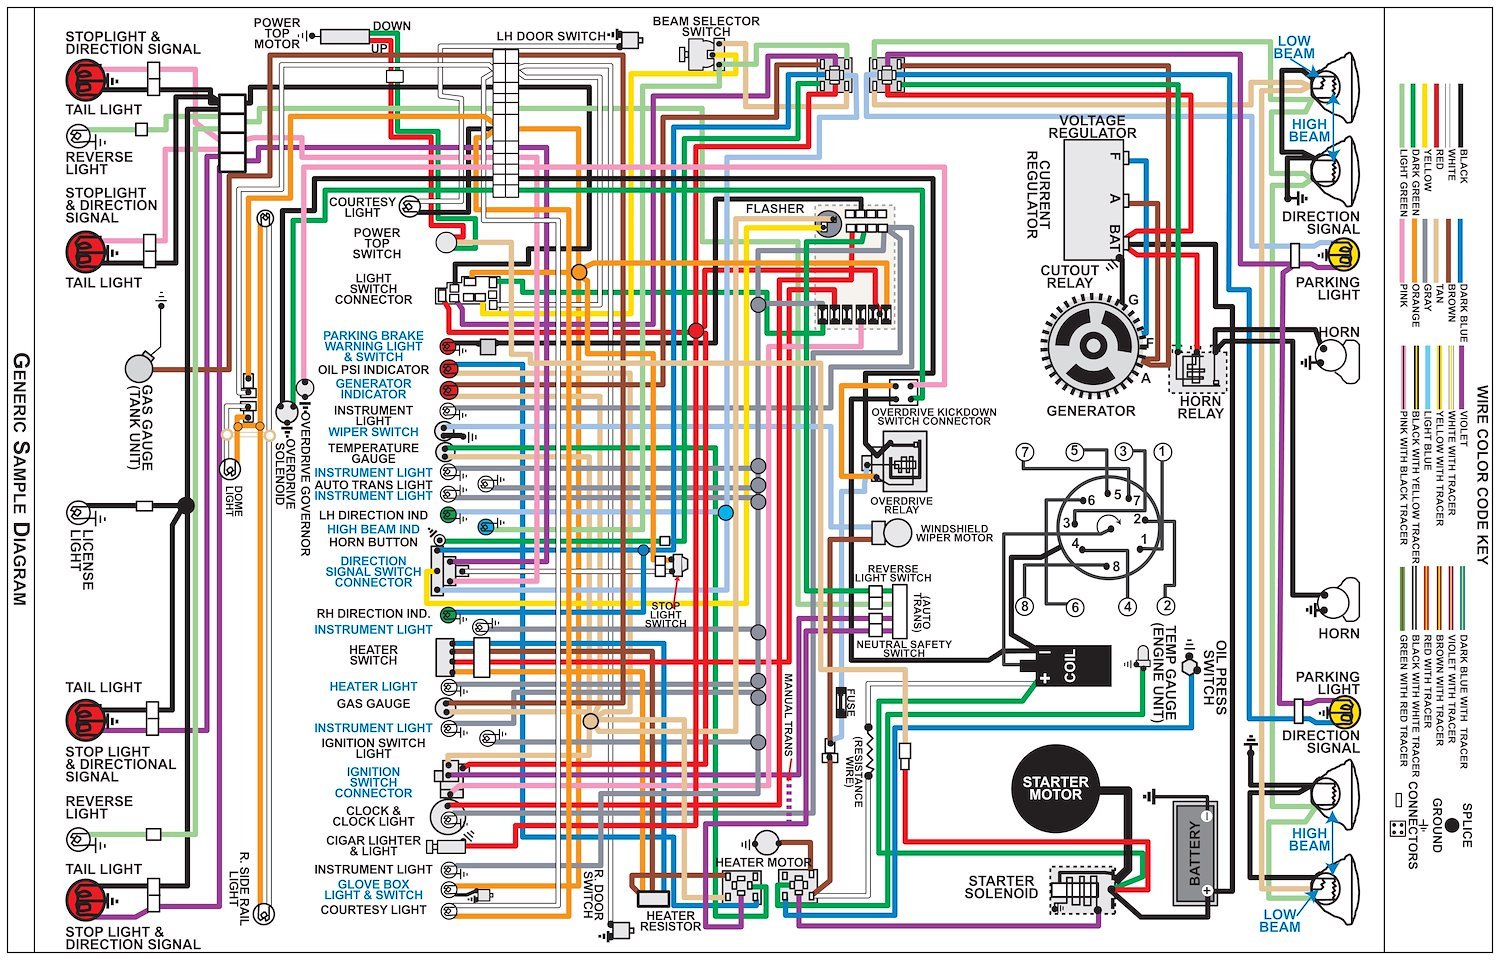 Wiring Diagram for 1958 Chevy Belair, Biscayne, Delray,